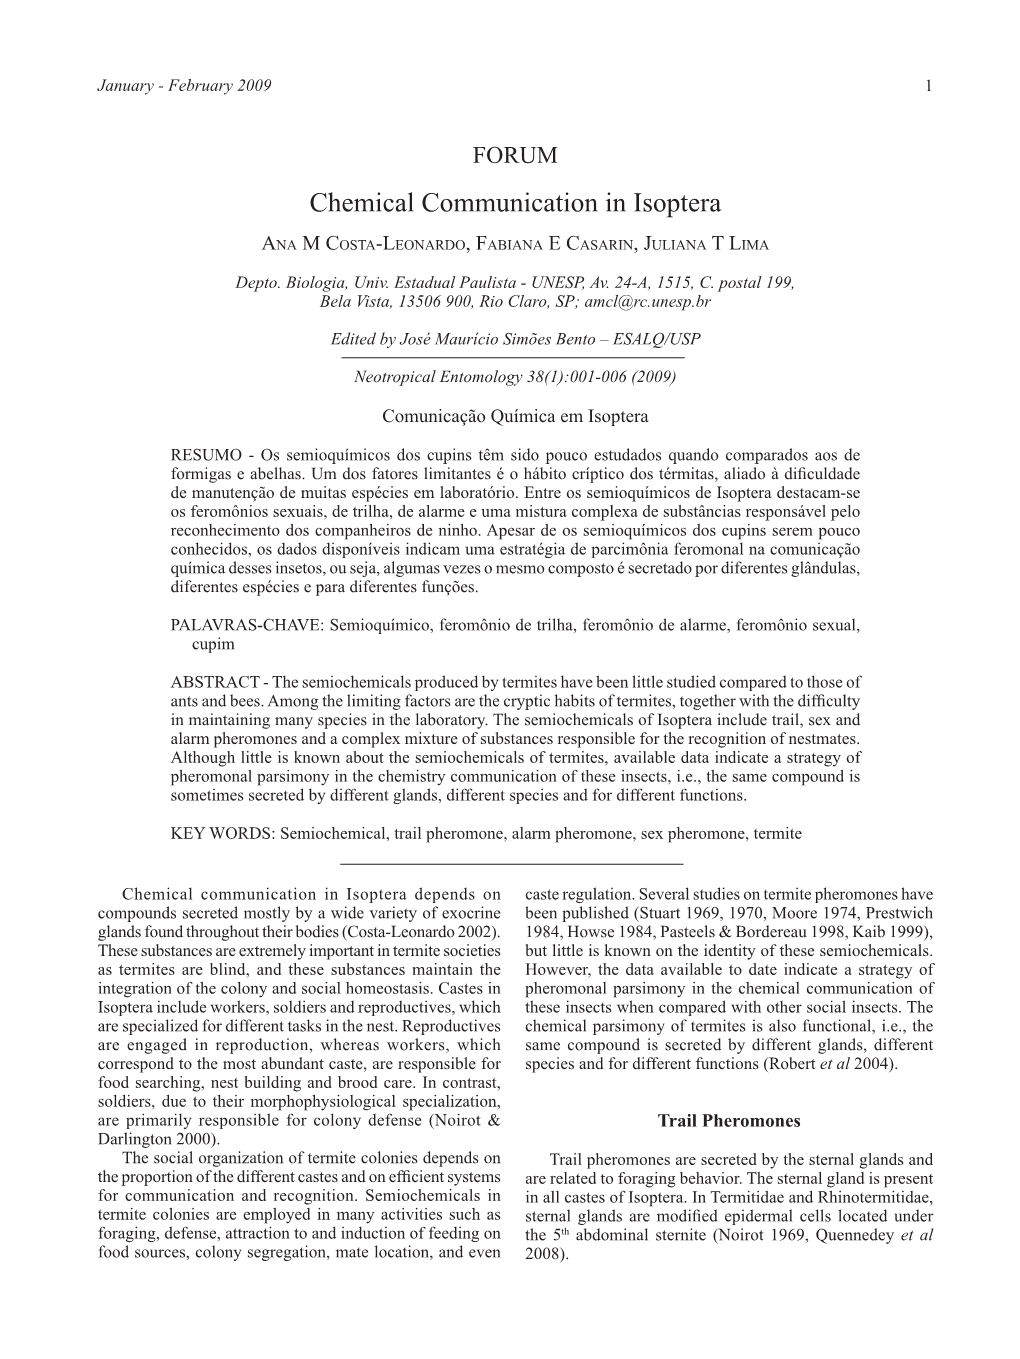 Chemical Communication in Isoptera